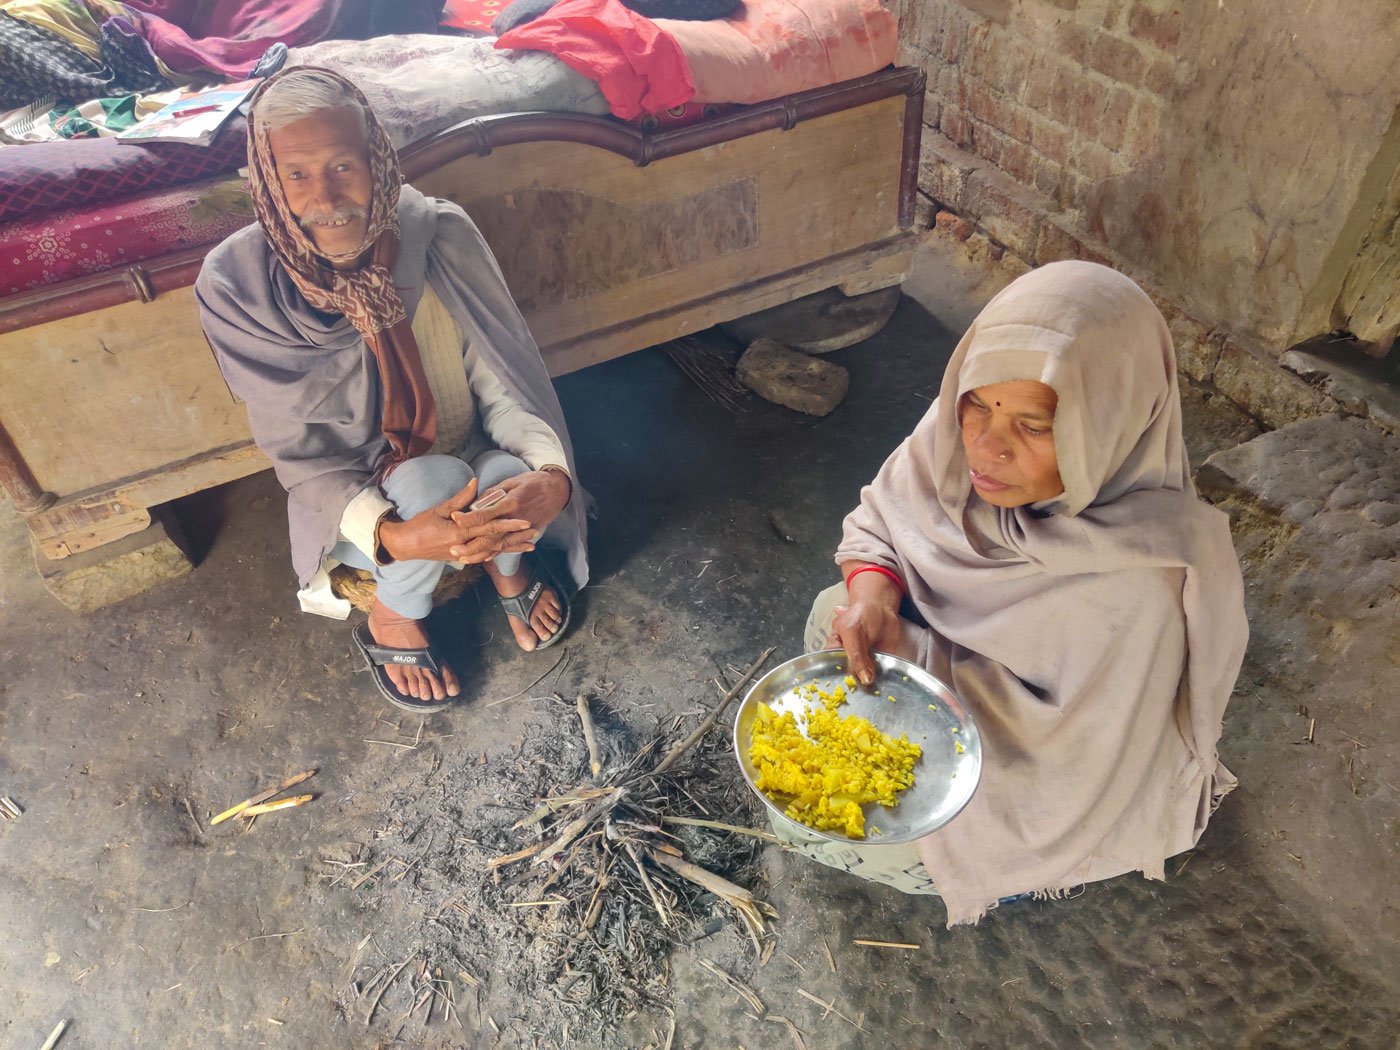 Srikrishna and his wife, Kanti, keeping warm by the fire. They mostly eat khichdi or dal rice as they have had to cut down on vegetables